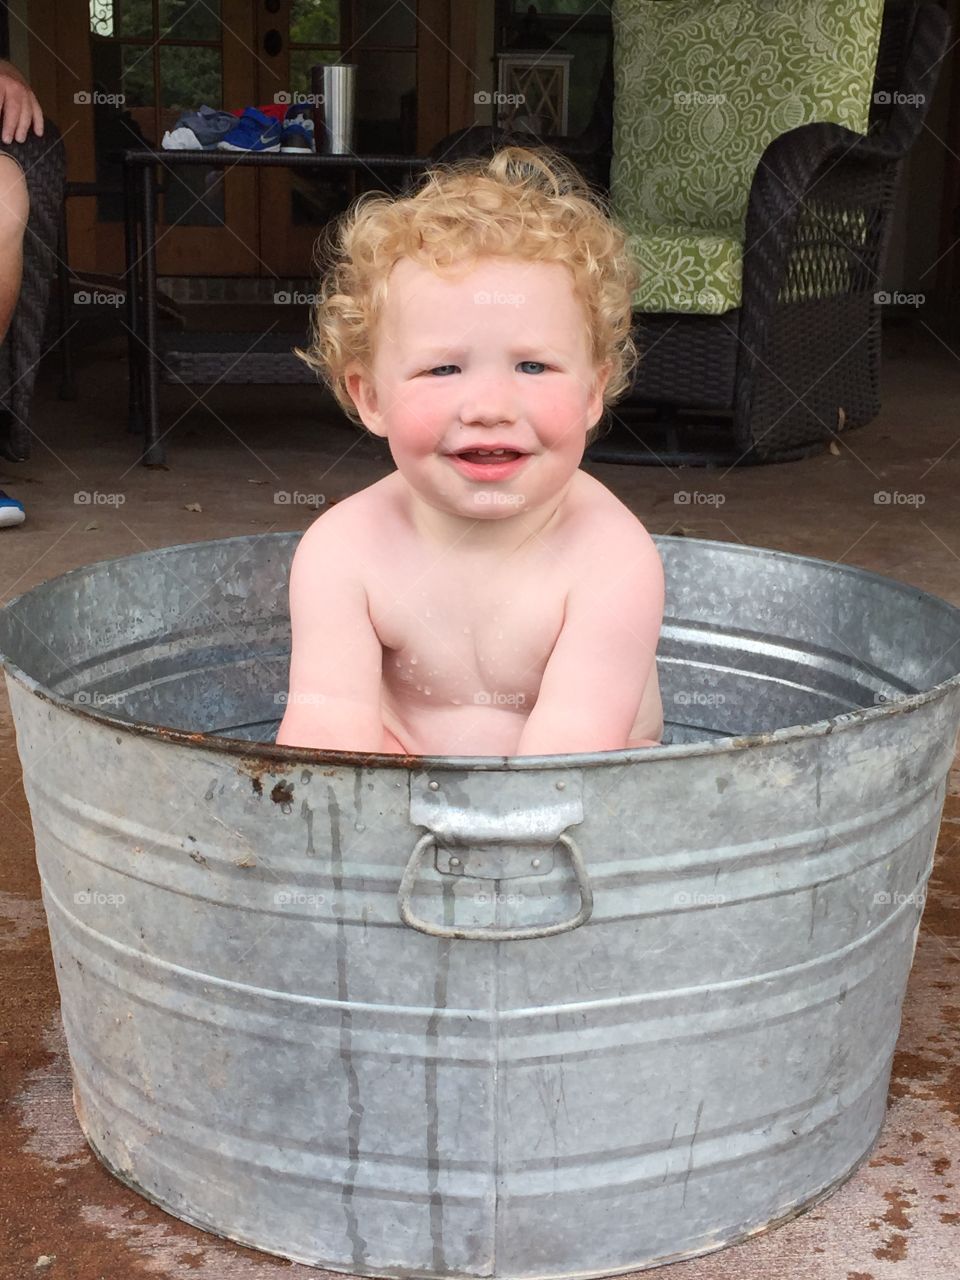 Beautiful red headed naked baby taking a bath in a metal tub on a warm summer day